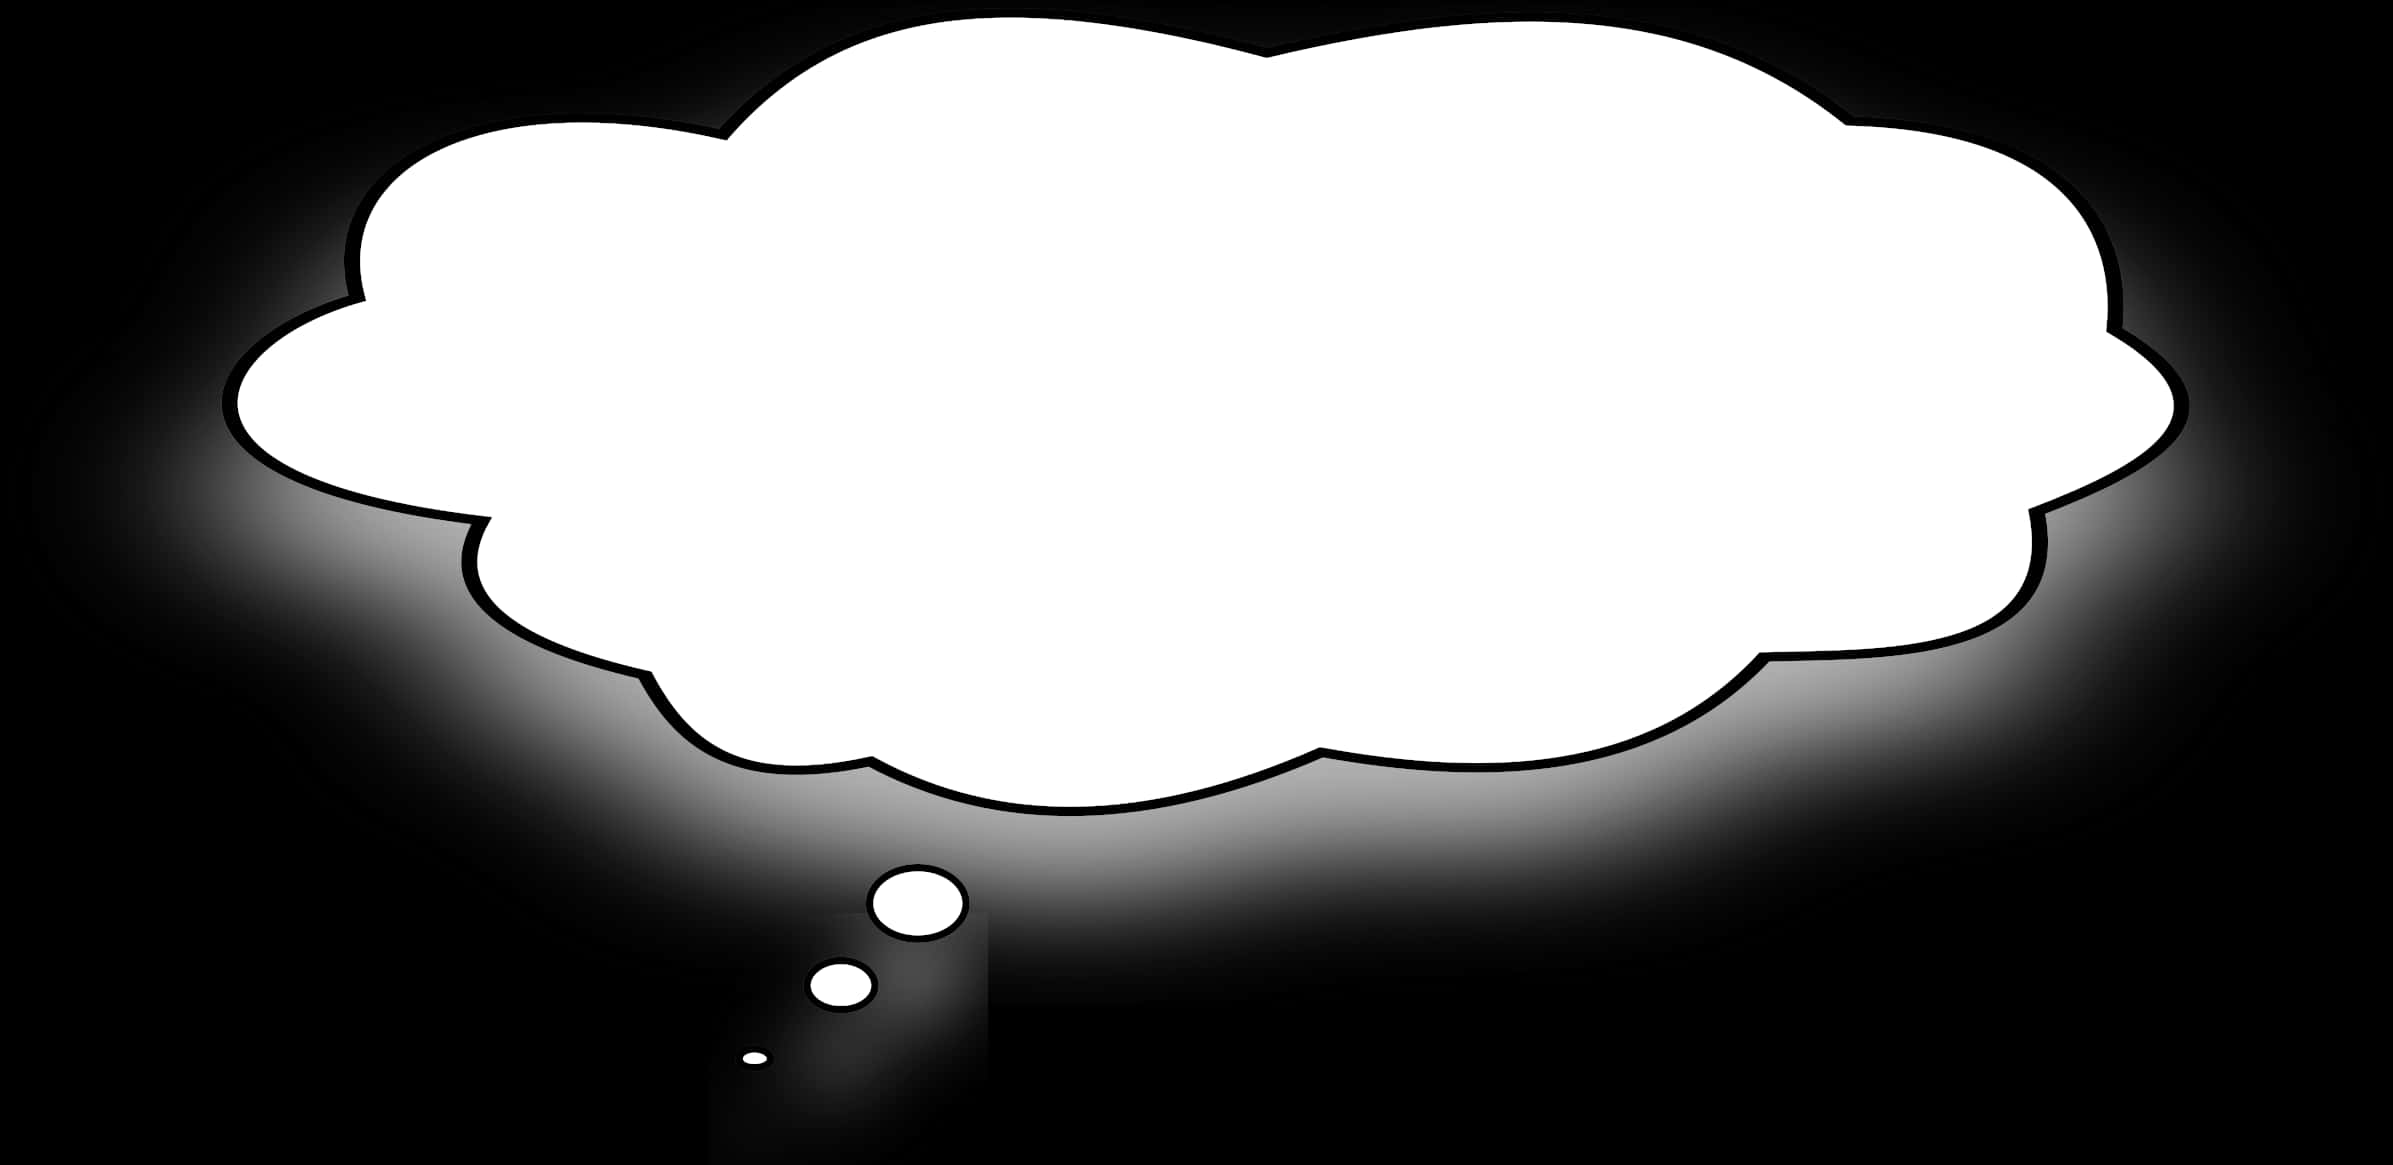 Thought Bubble Graphic Black Background